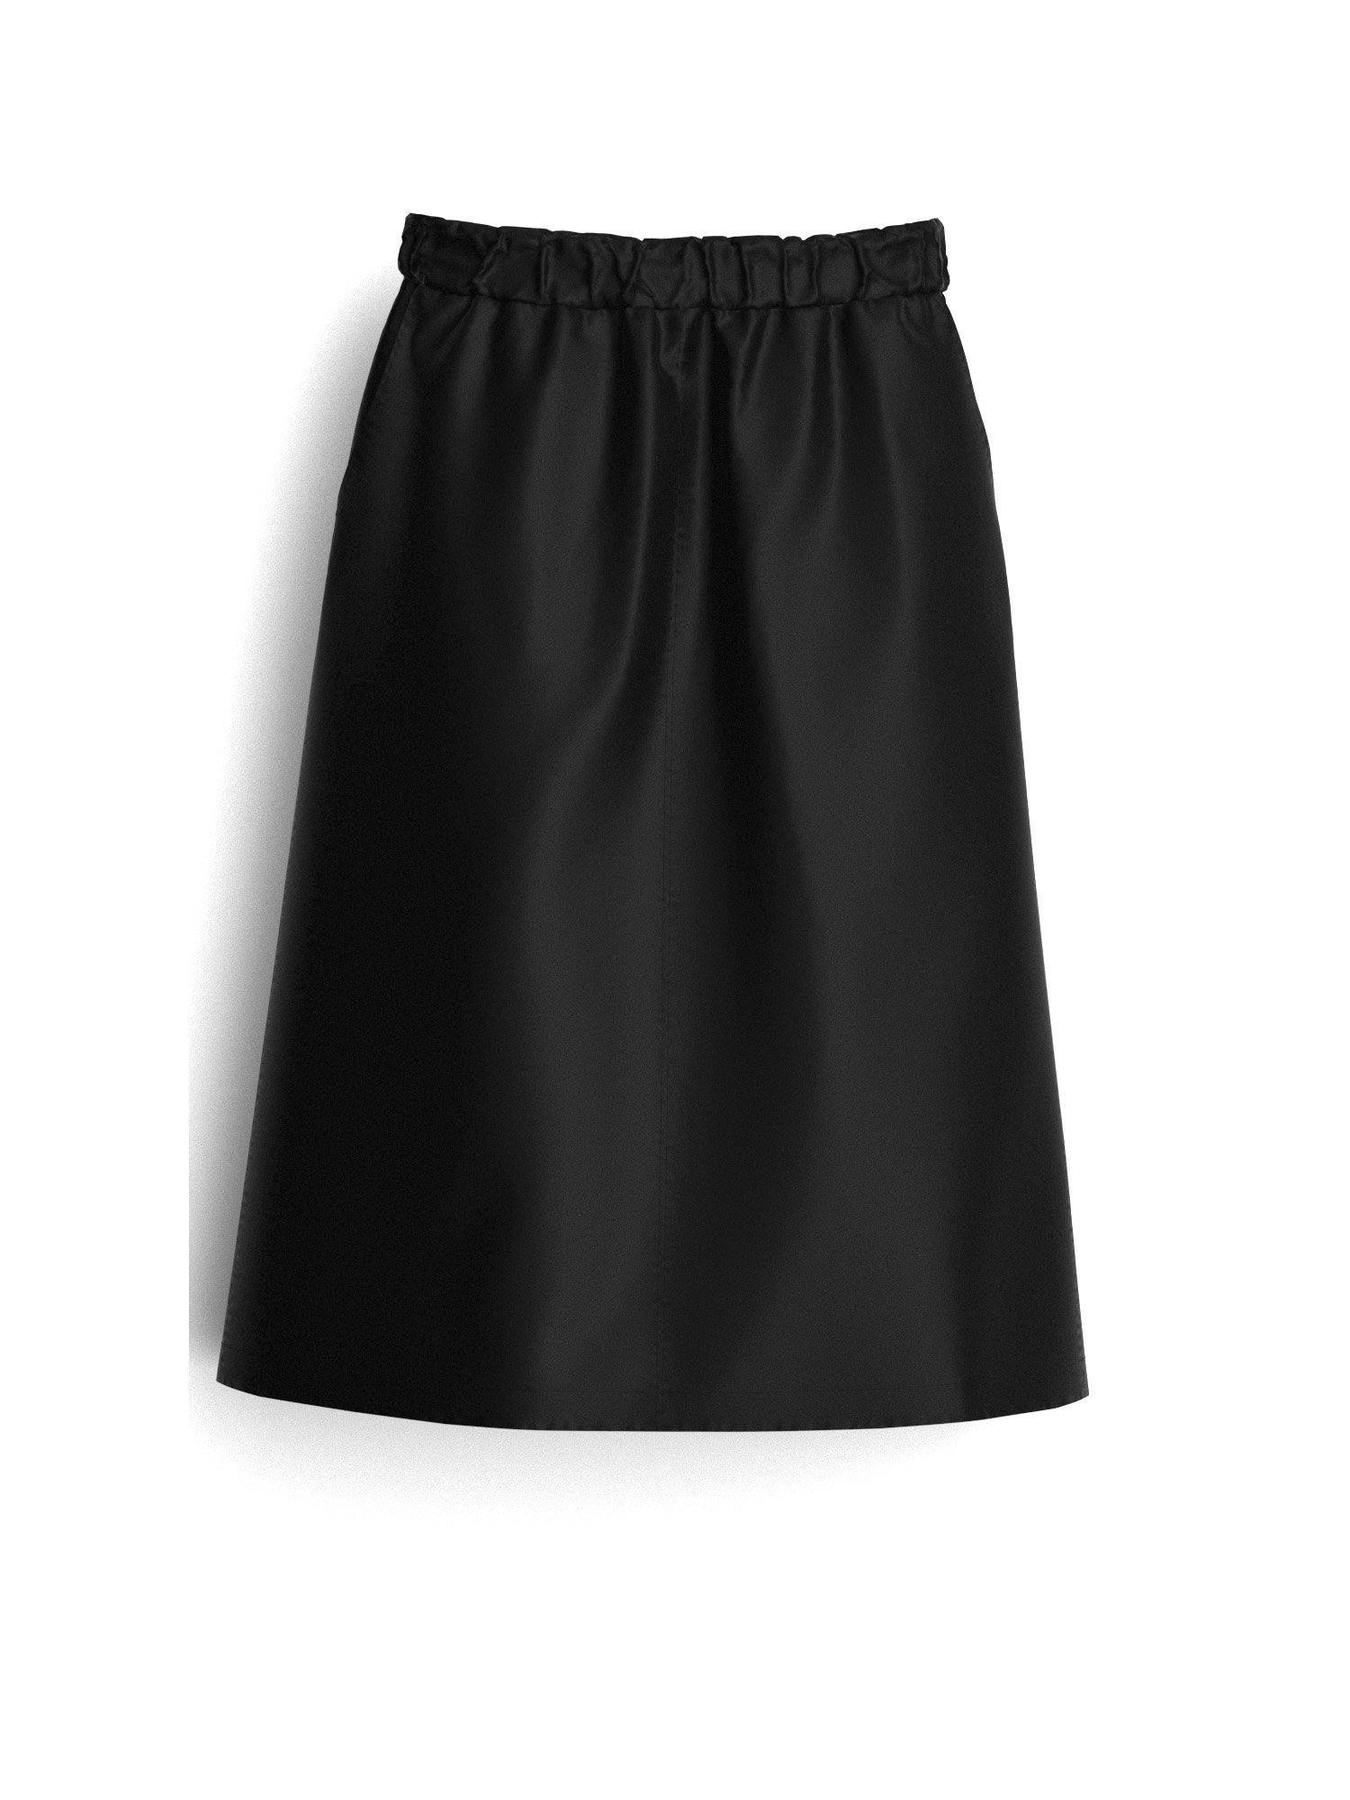 THE ASSEMBLY LINE • A-Line Midi Skirt Sewing Pattern (XS - L) – The ...